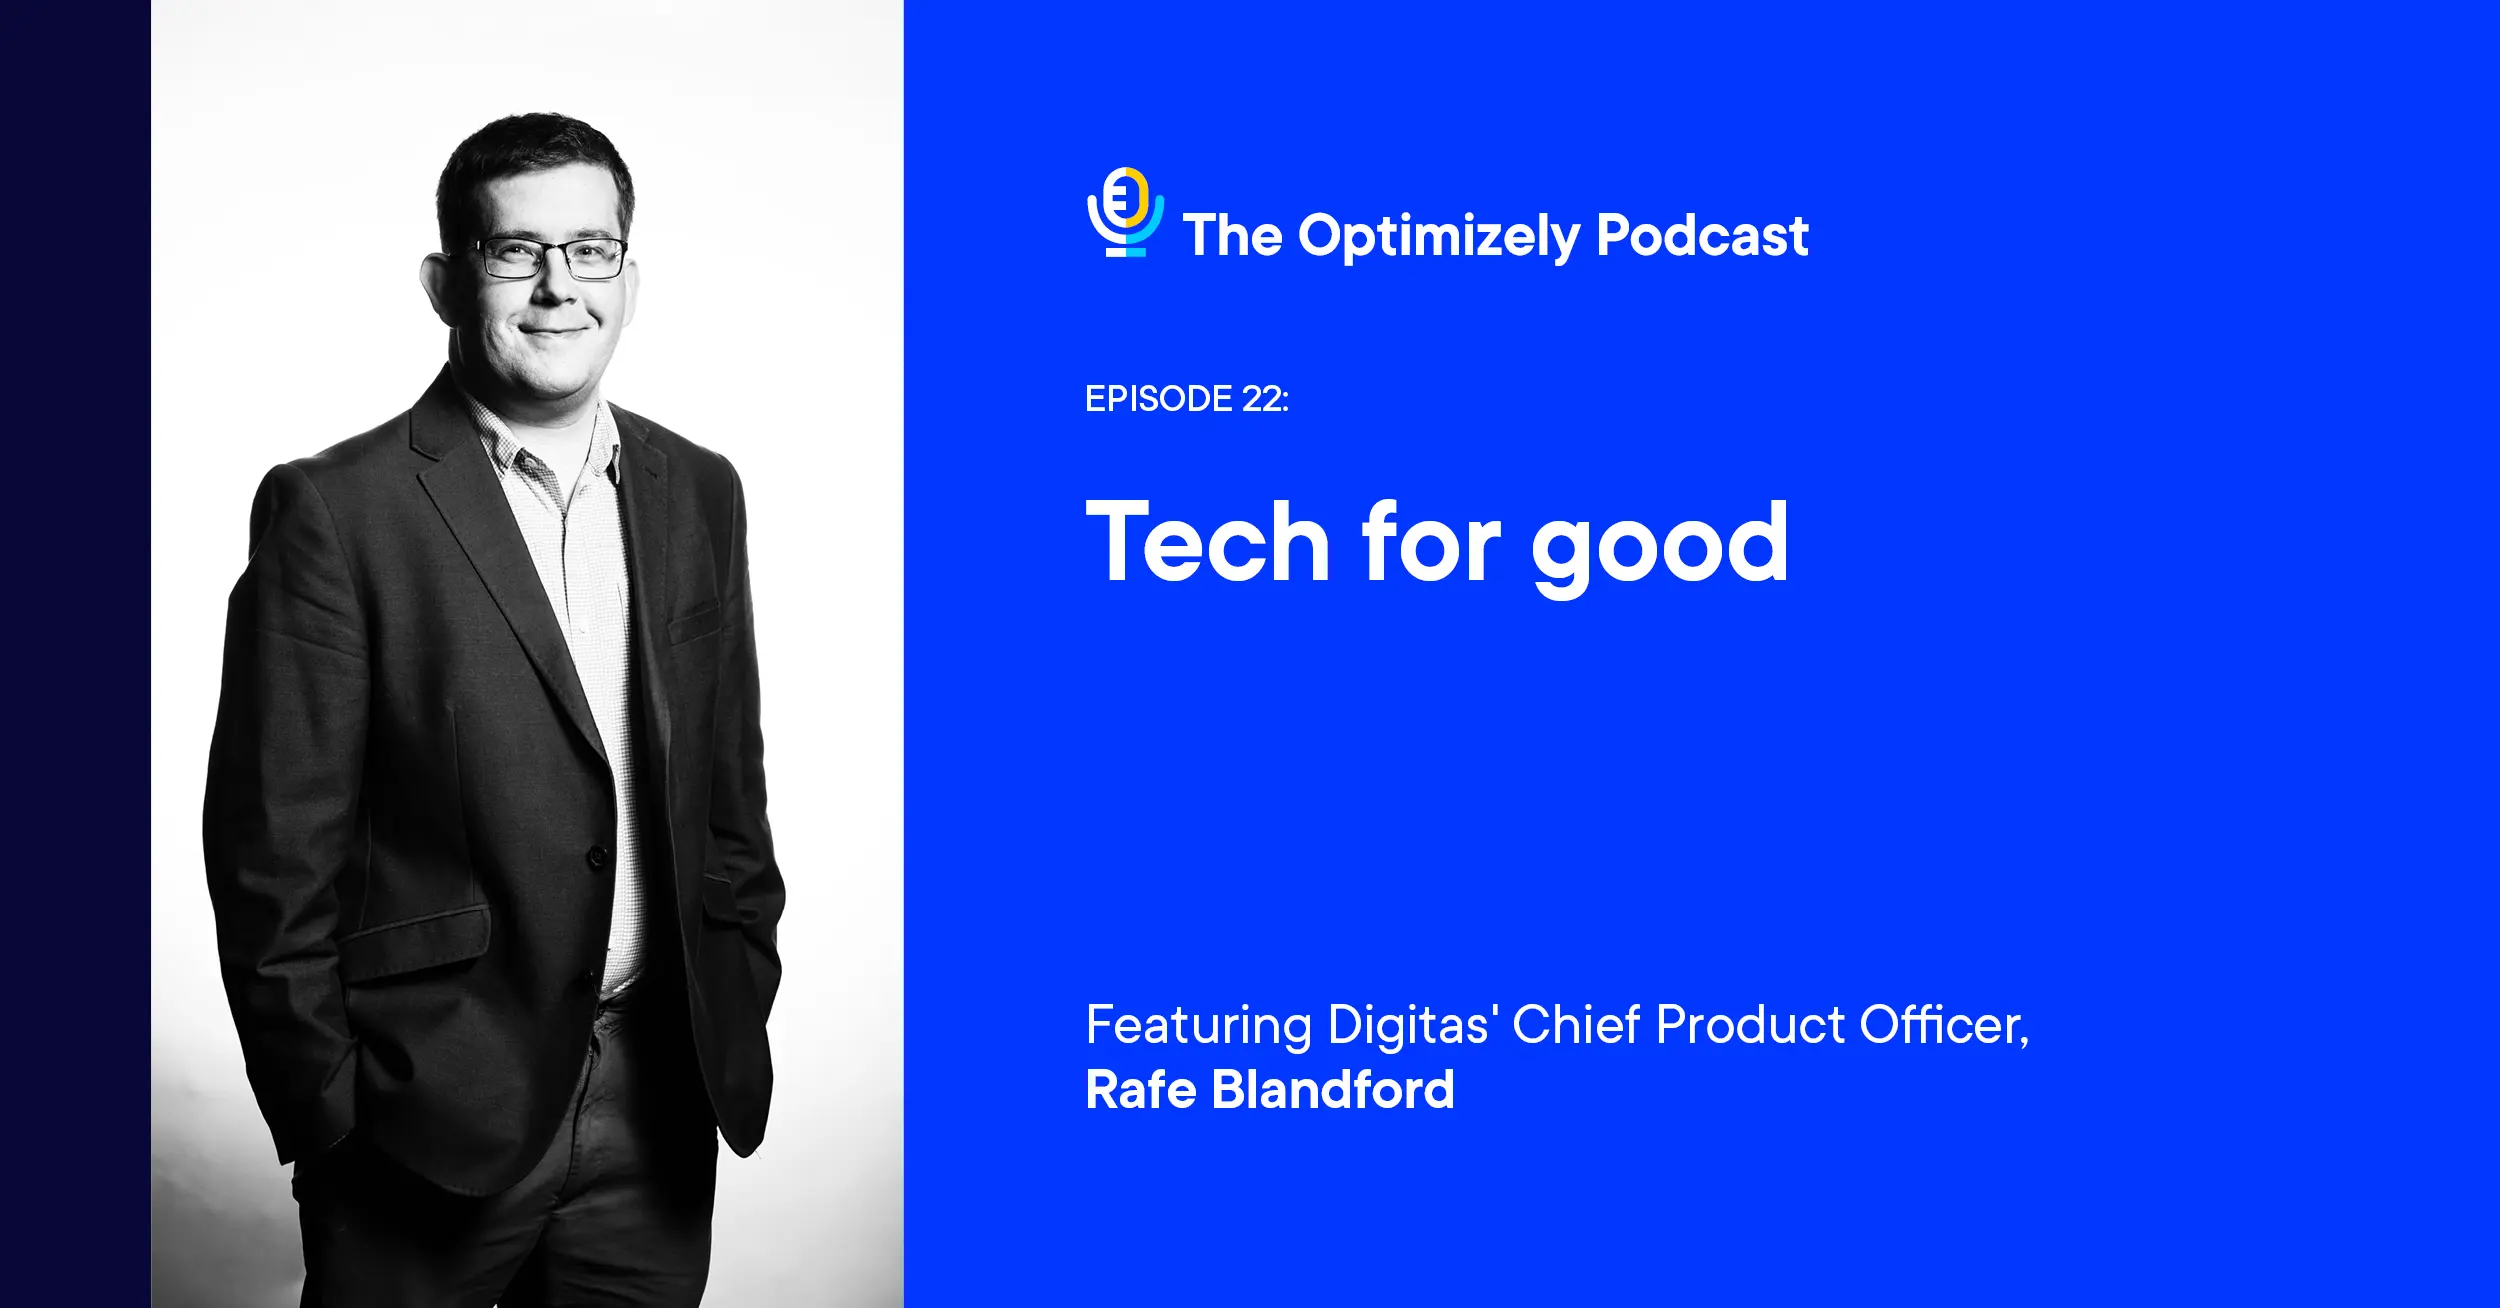 The Optimizely Podcast - episode 22: Tech for good (featuring Digitas)